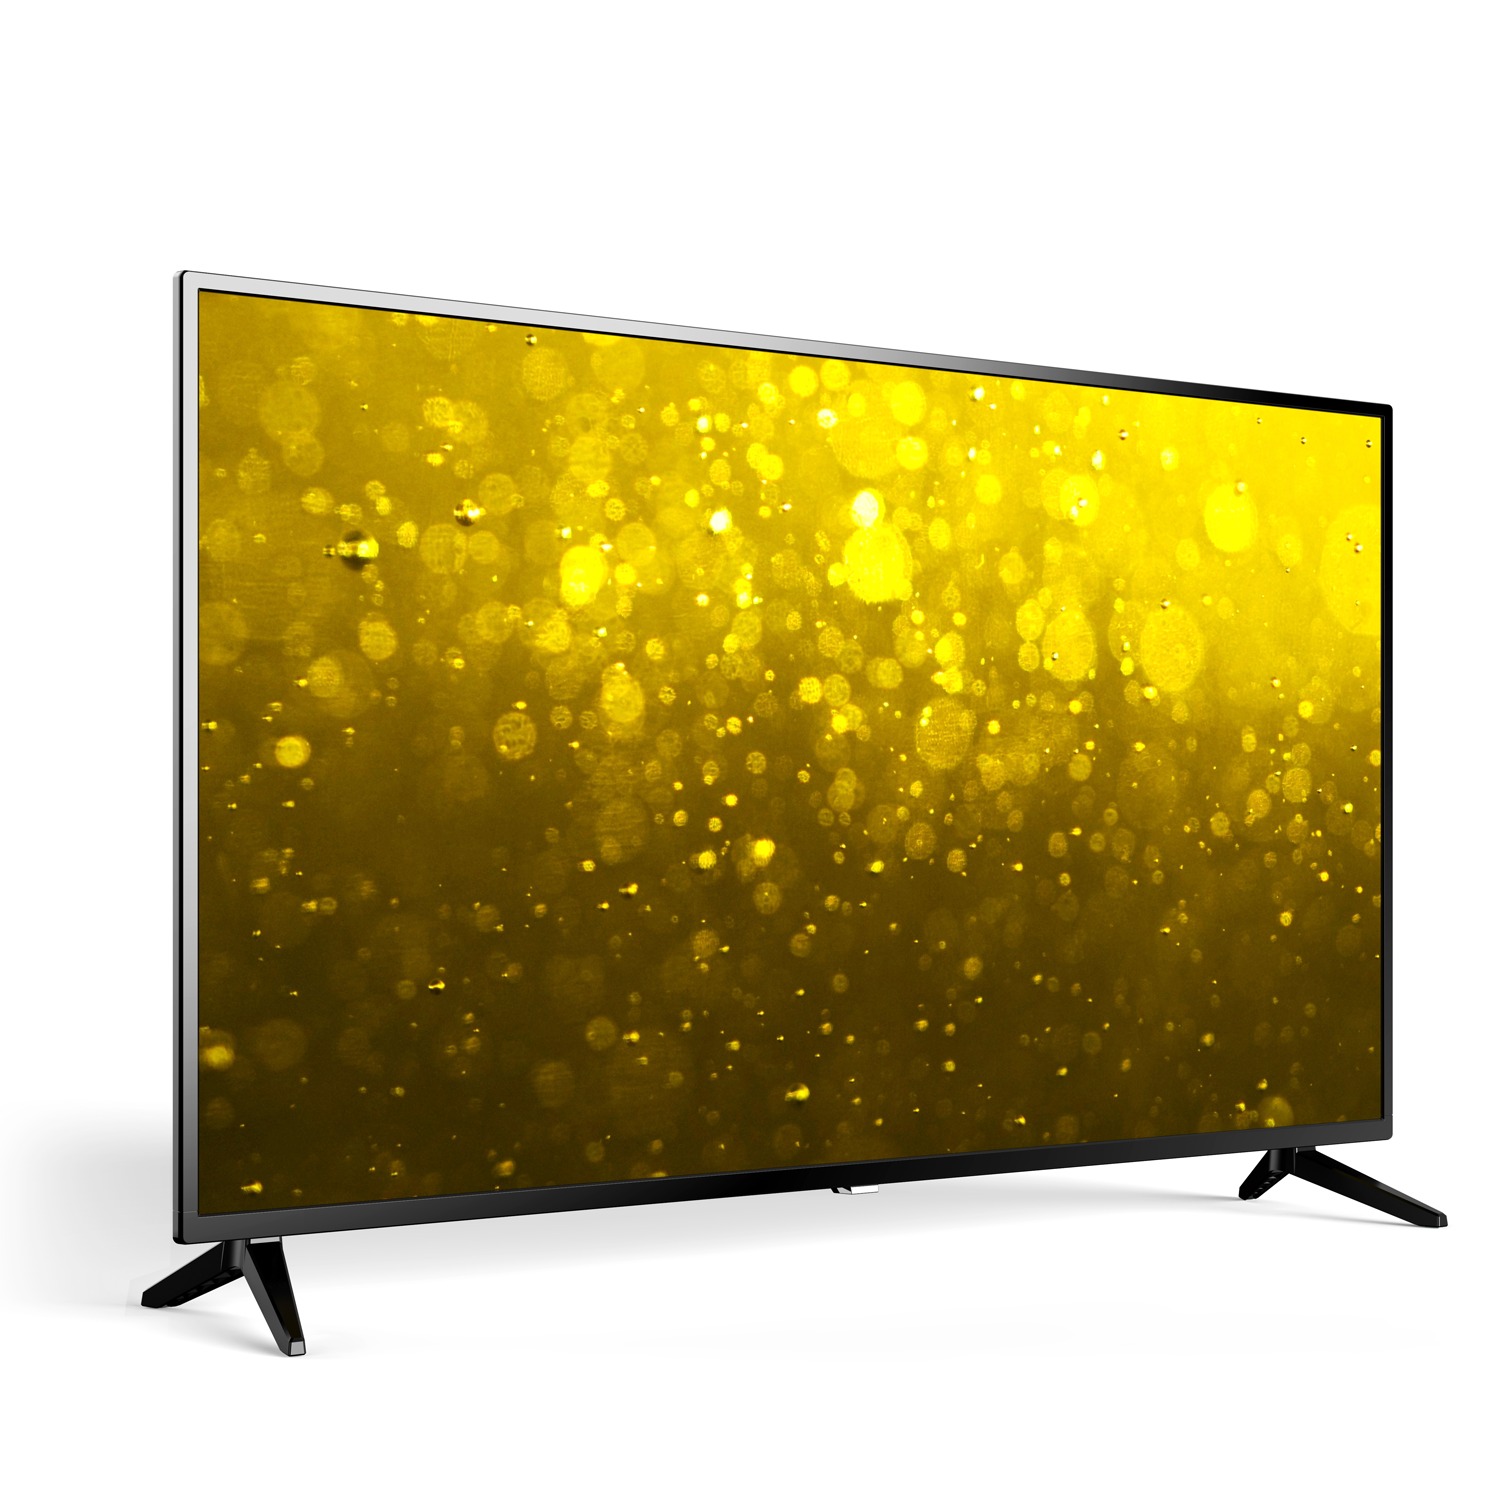 TV 32 Inches Smart From Unionaire LED – L32UT610 - Unionaire